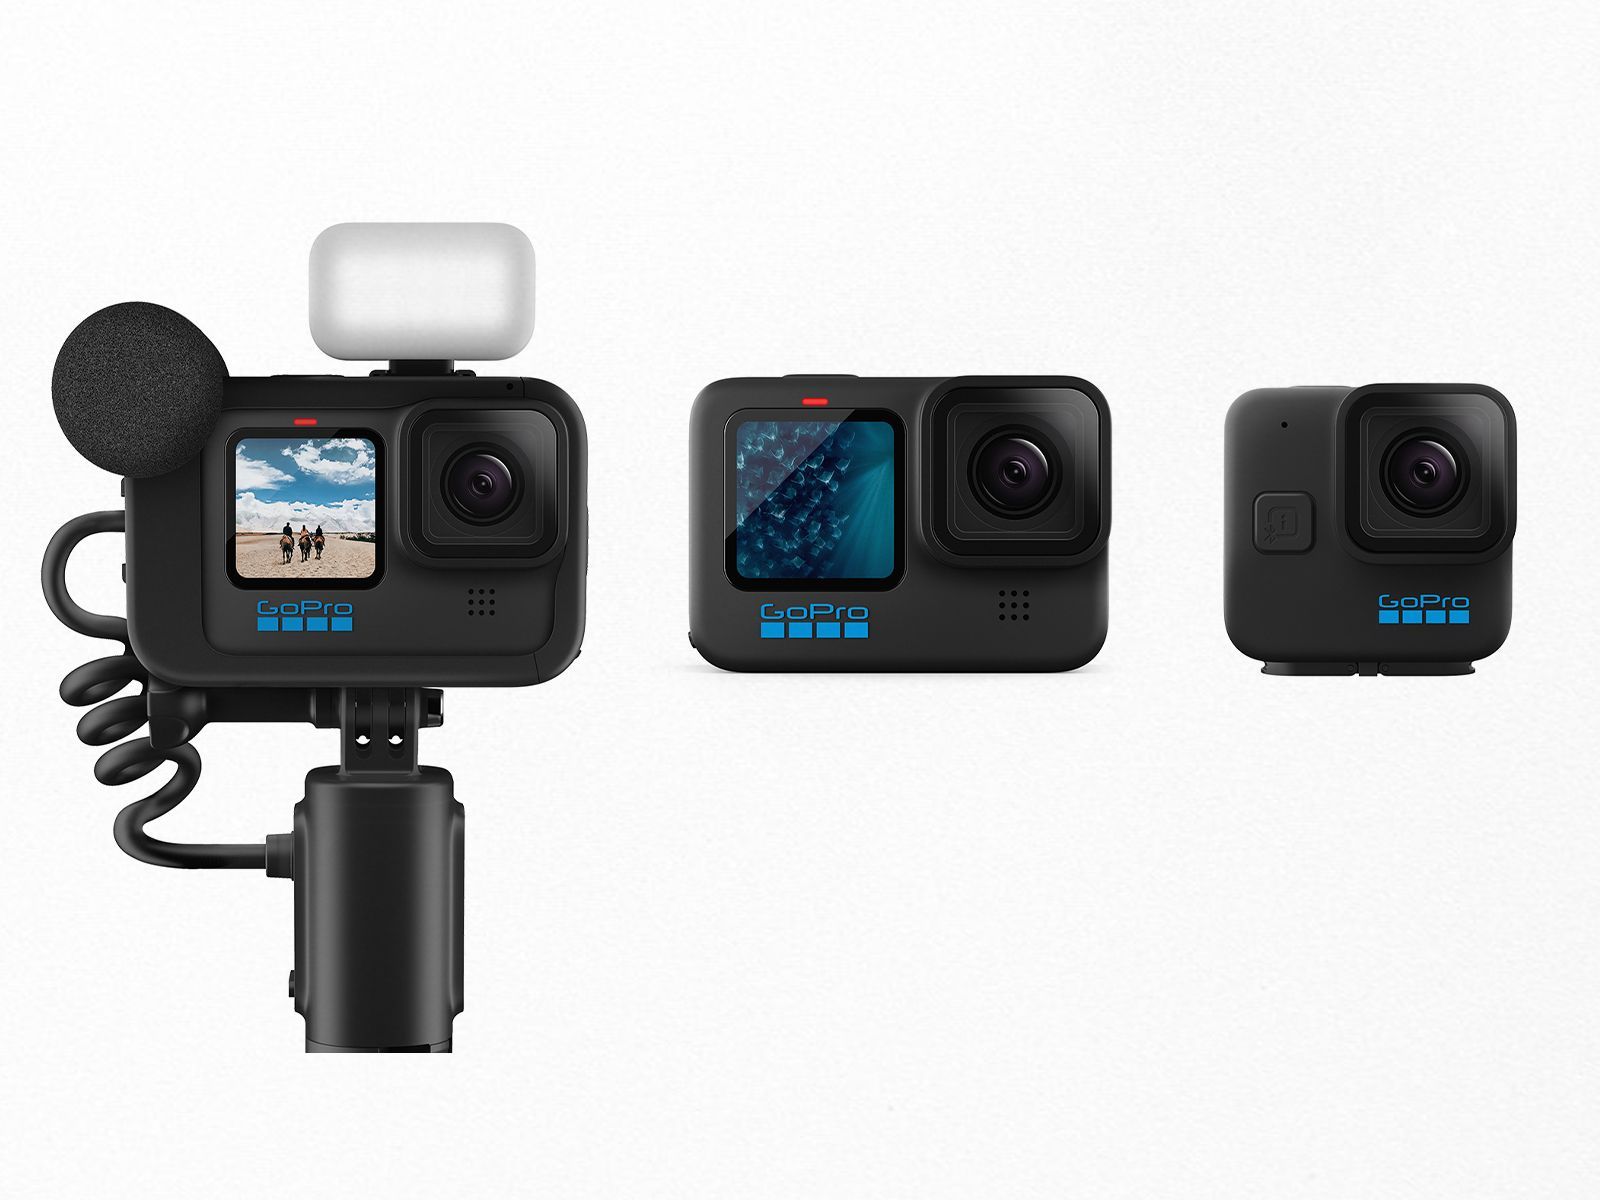 Discover the new HERO11 Black cameras from GoPro